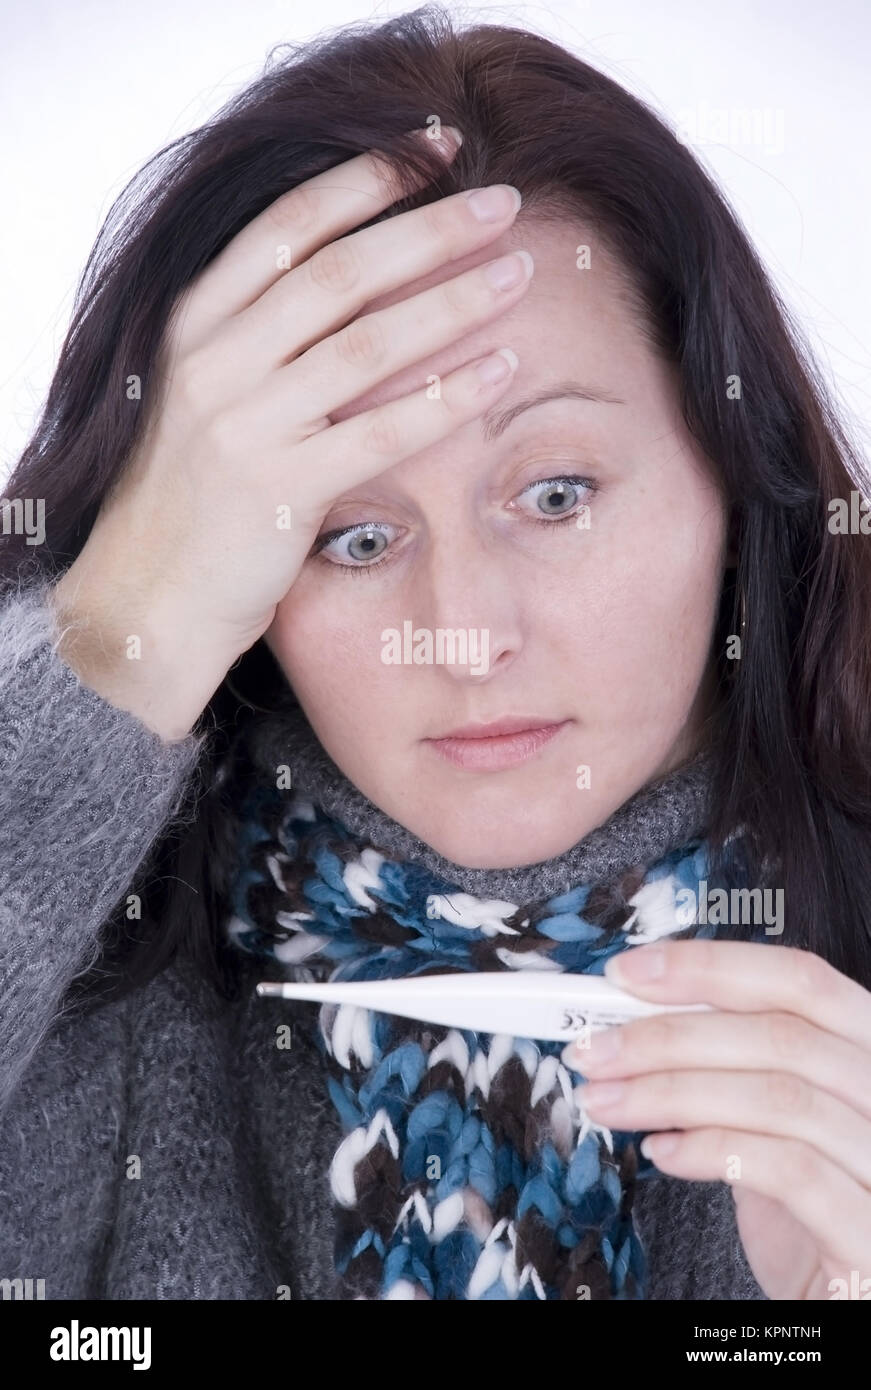 Model release , Junge Frau misst Fieber - woman with clinical thermometer Stock Photo